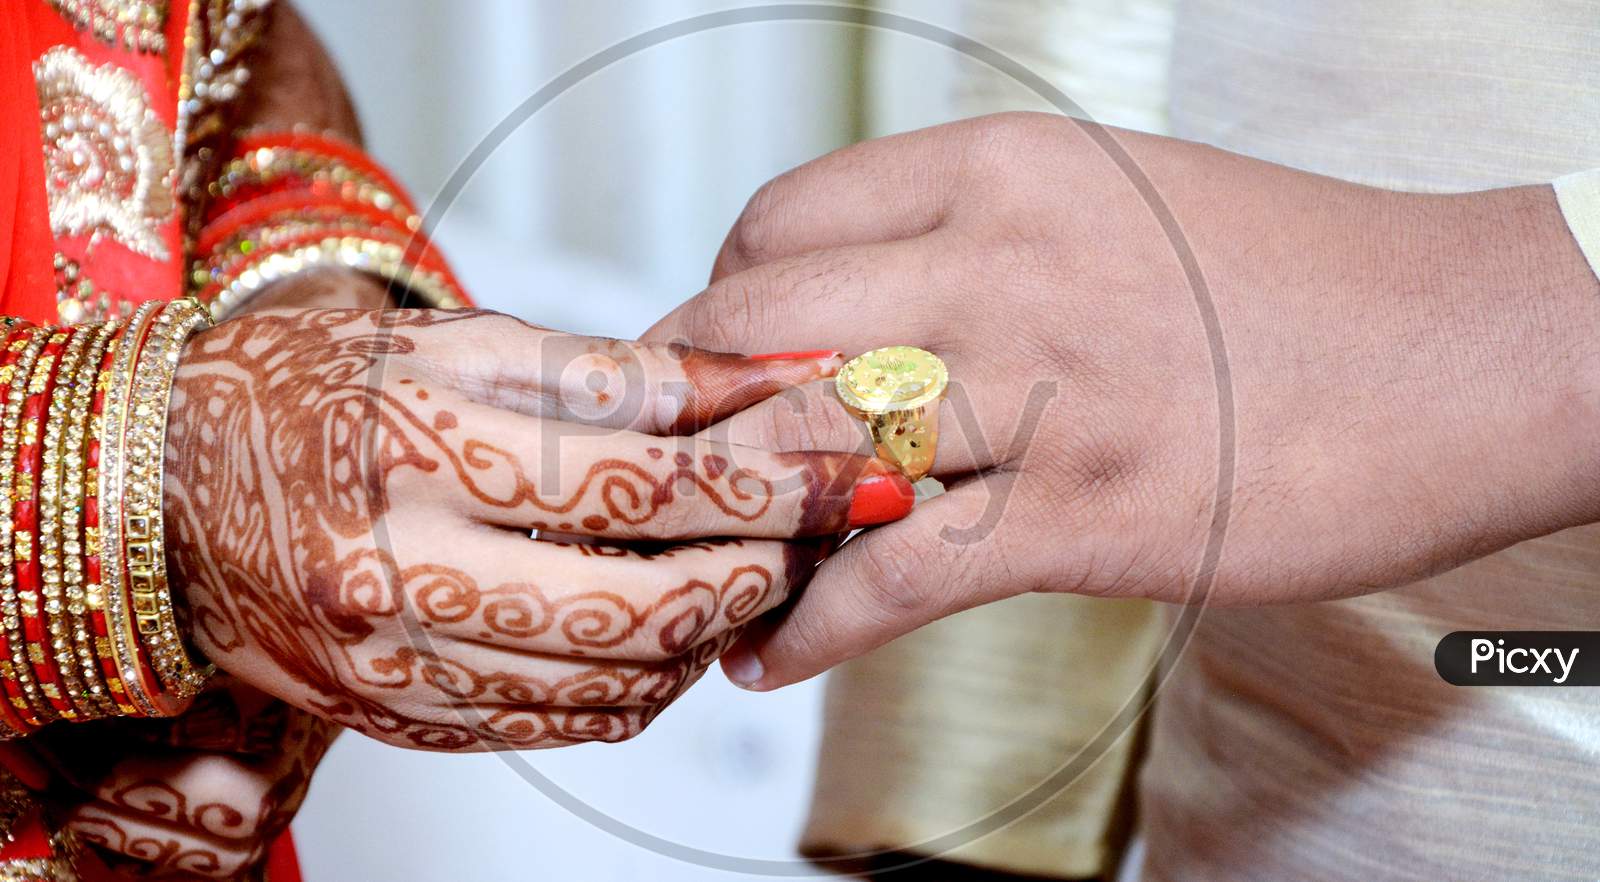 Indian Bride Putting A Wedding Ring On Groom'S Finger